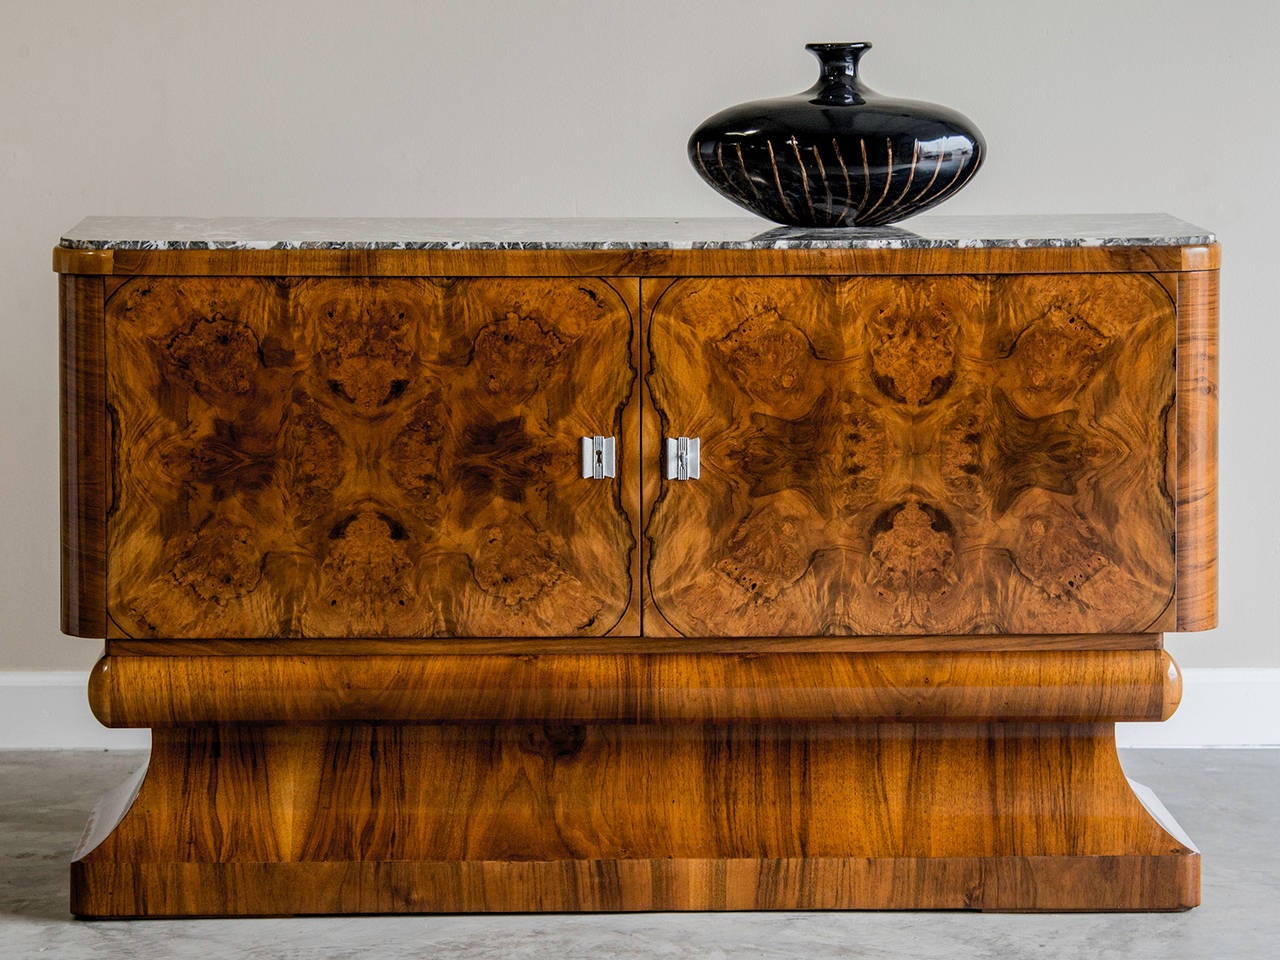 Art Deco Period Burl Walnut Buffet, Black Marble Top, France c. 1930. The spectacular pattern of the walnut veneer used to sheathe every surface of this buffet is breathtaking and showcases the exceptional skill of early twentieth century cabinet